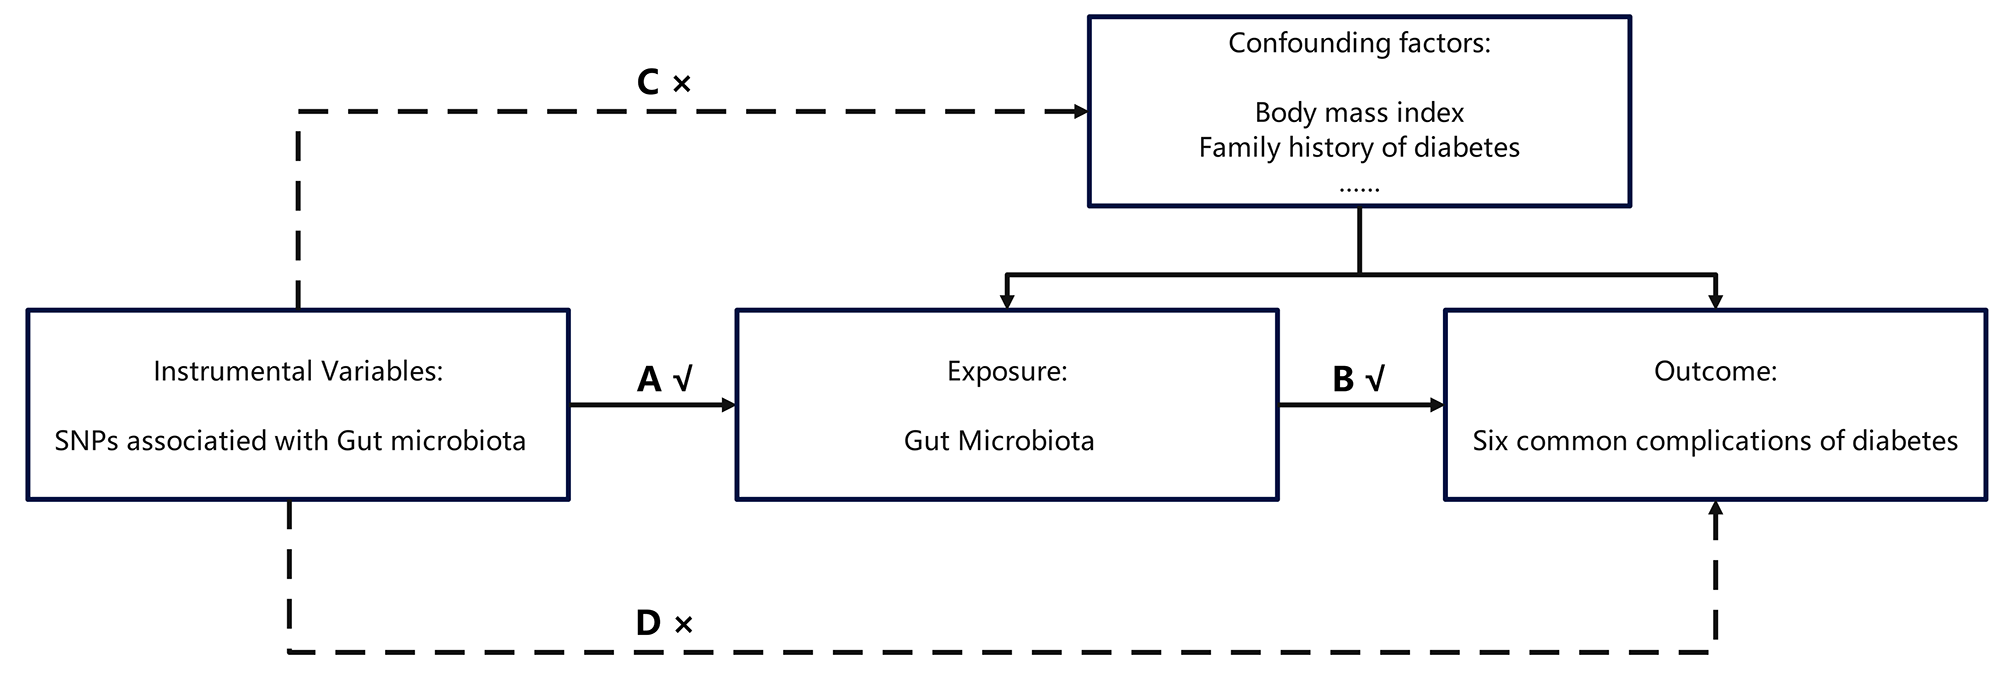 Large-scale causal analysis of gut microbiota and six common complications of diabetes: a mendelian randomization study